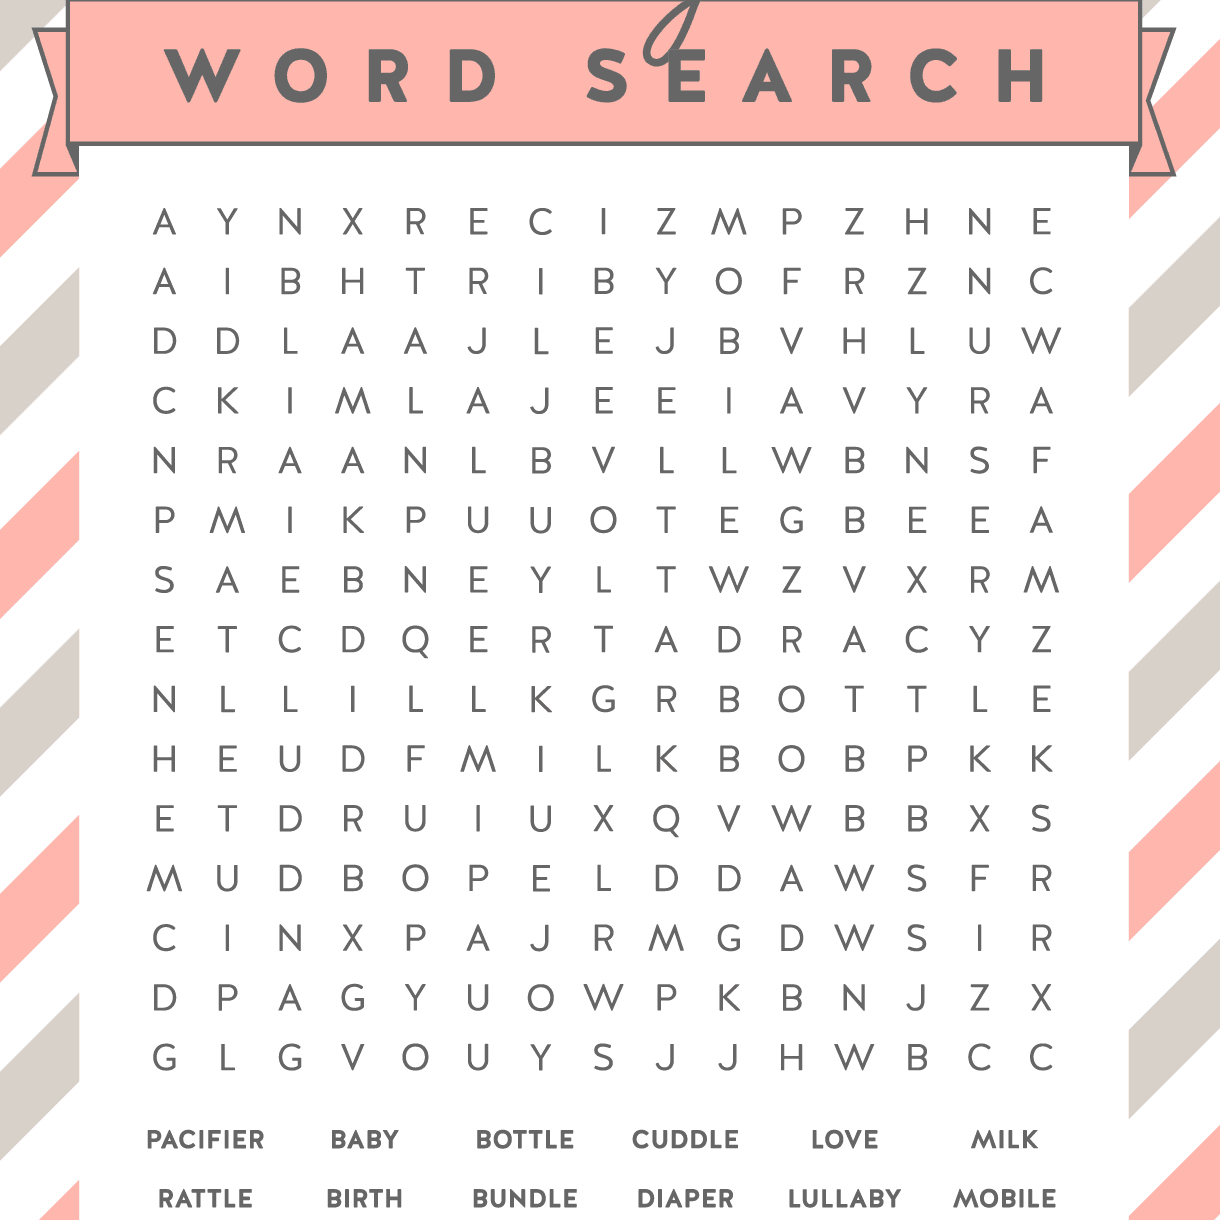 Free Baby Shower Word Search Puzzles - Free Printable Word Finds